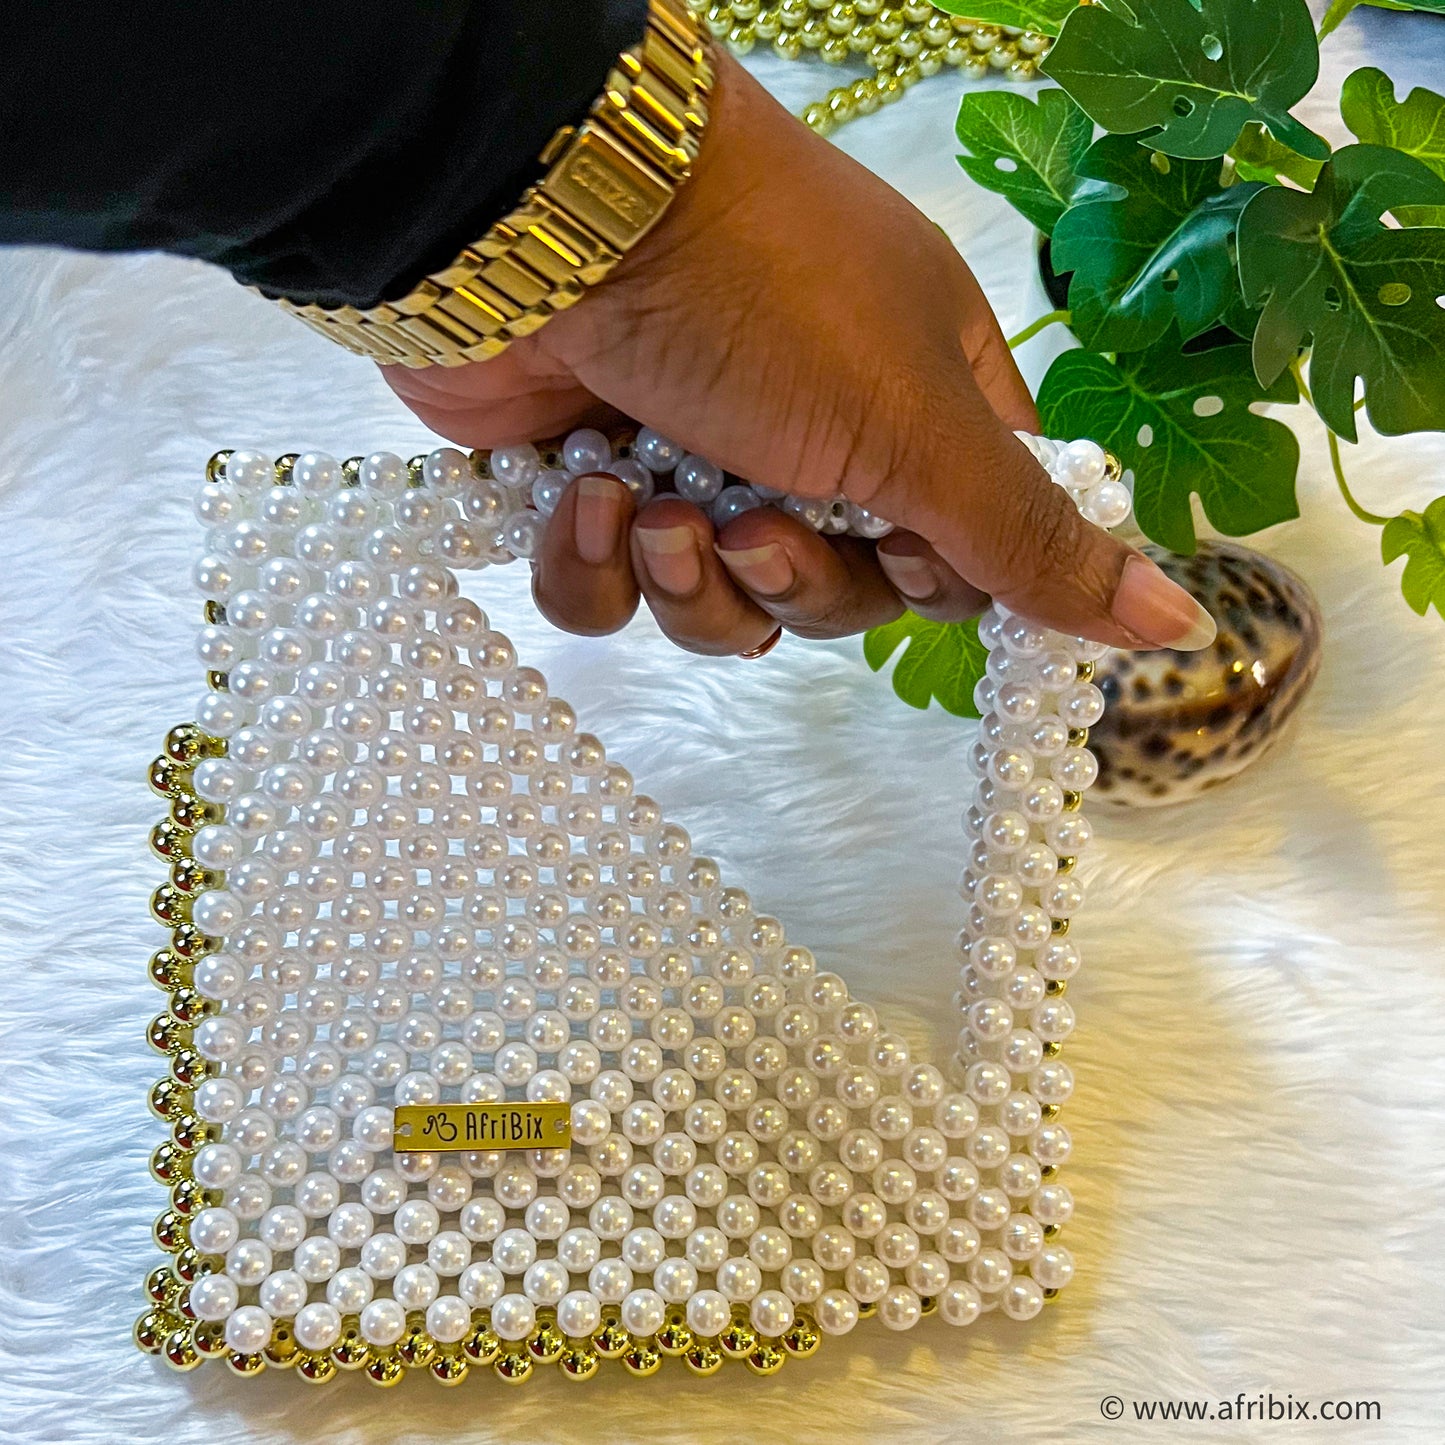 White and Gold Square Clutch Hand Bag